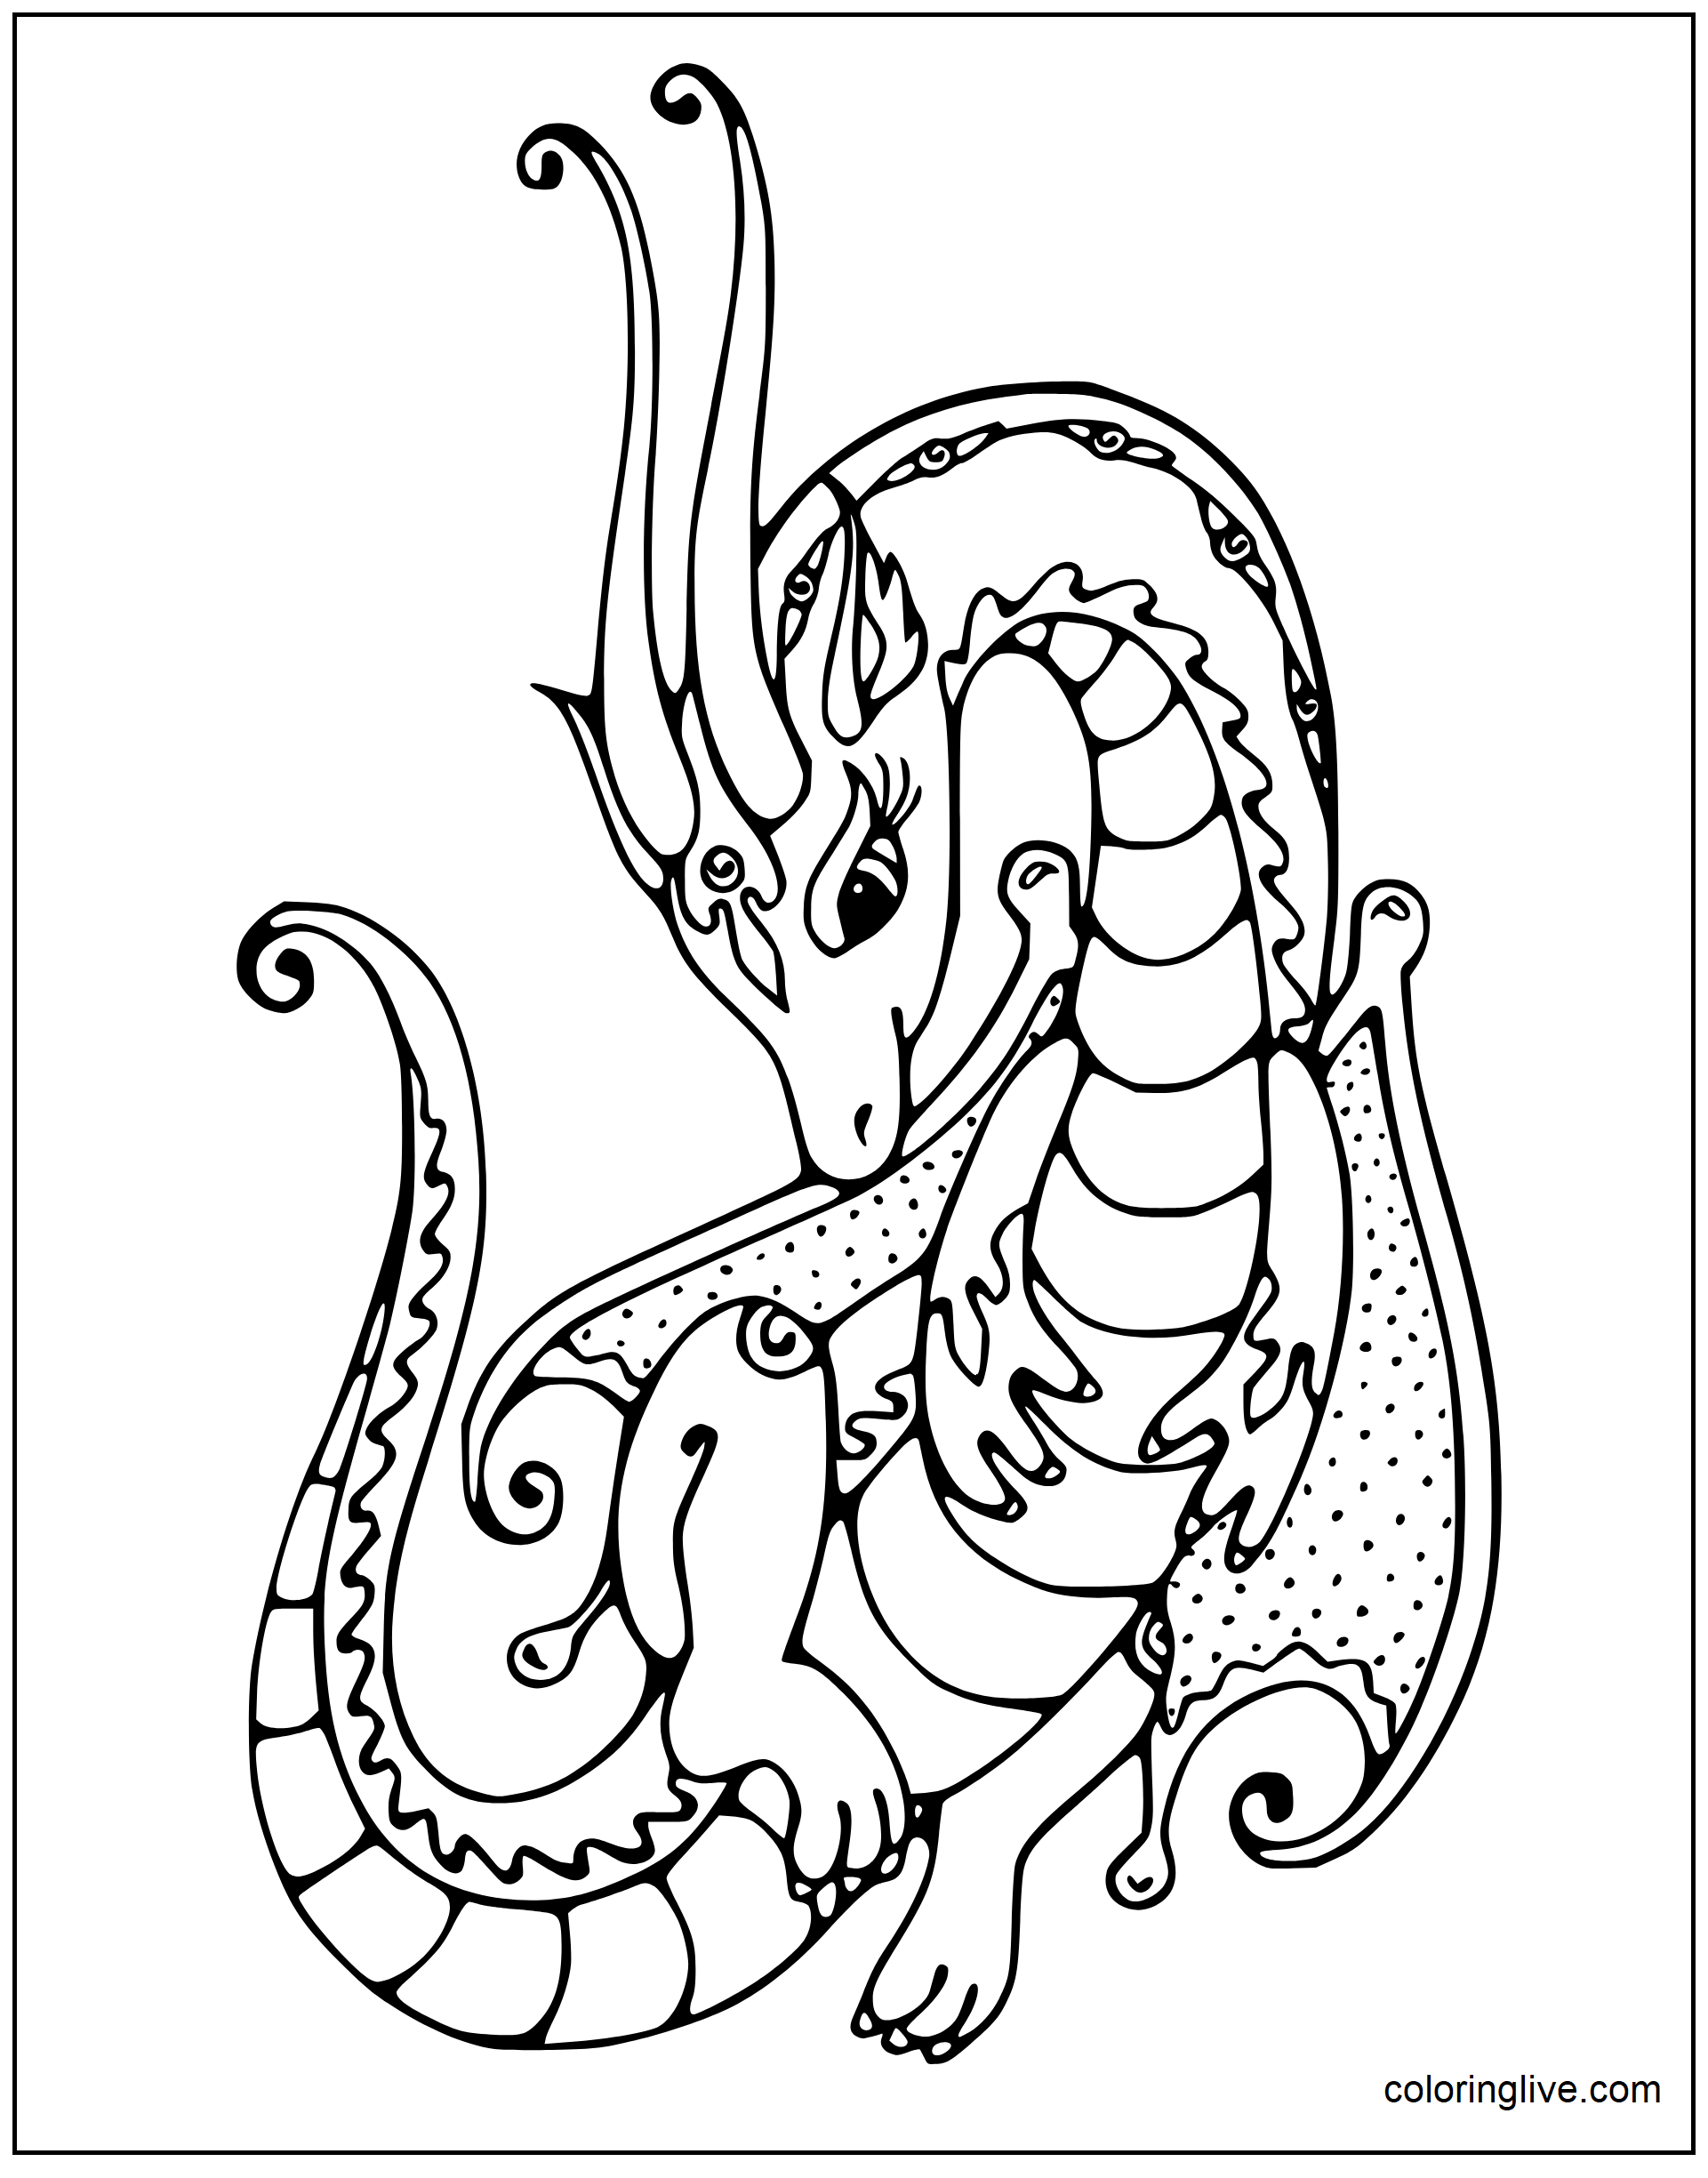 Printable Female dragon Coloring Page for kids.